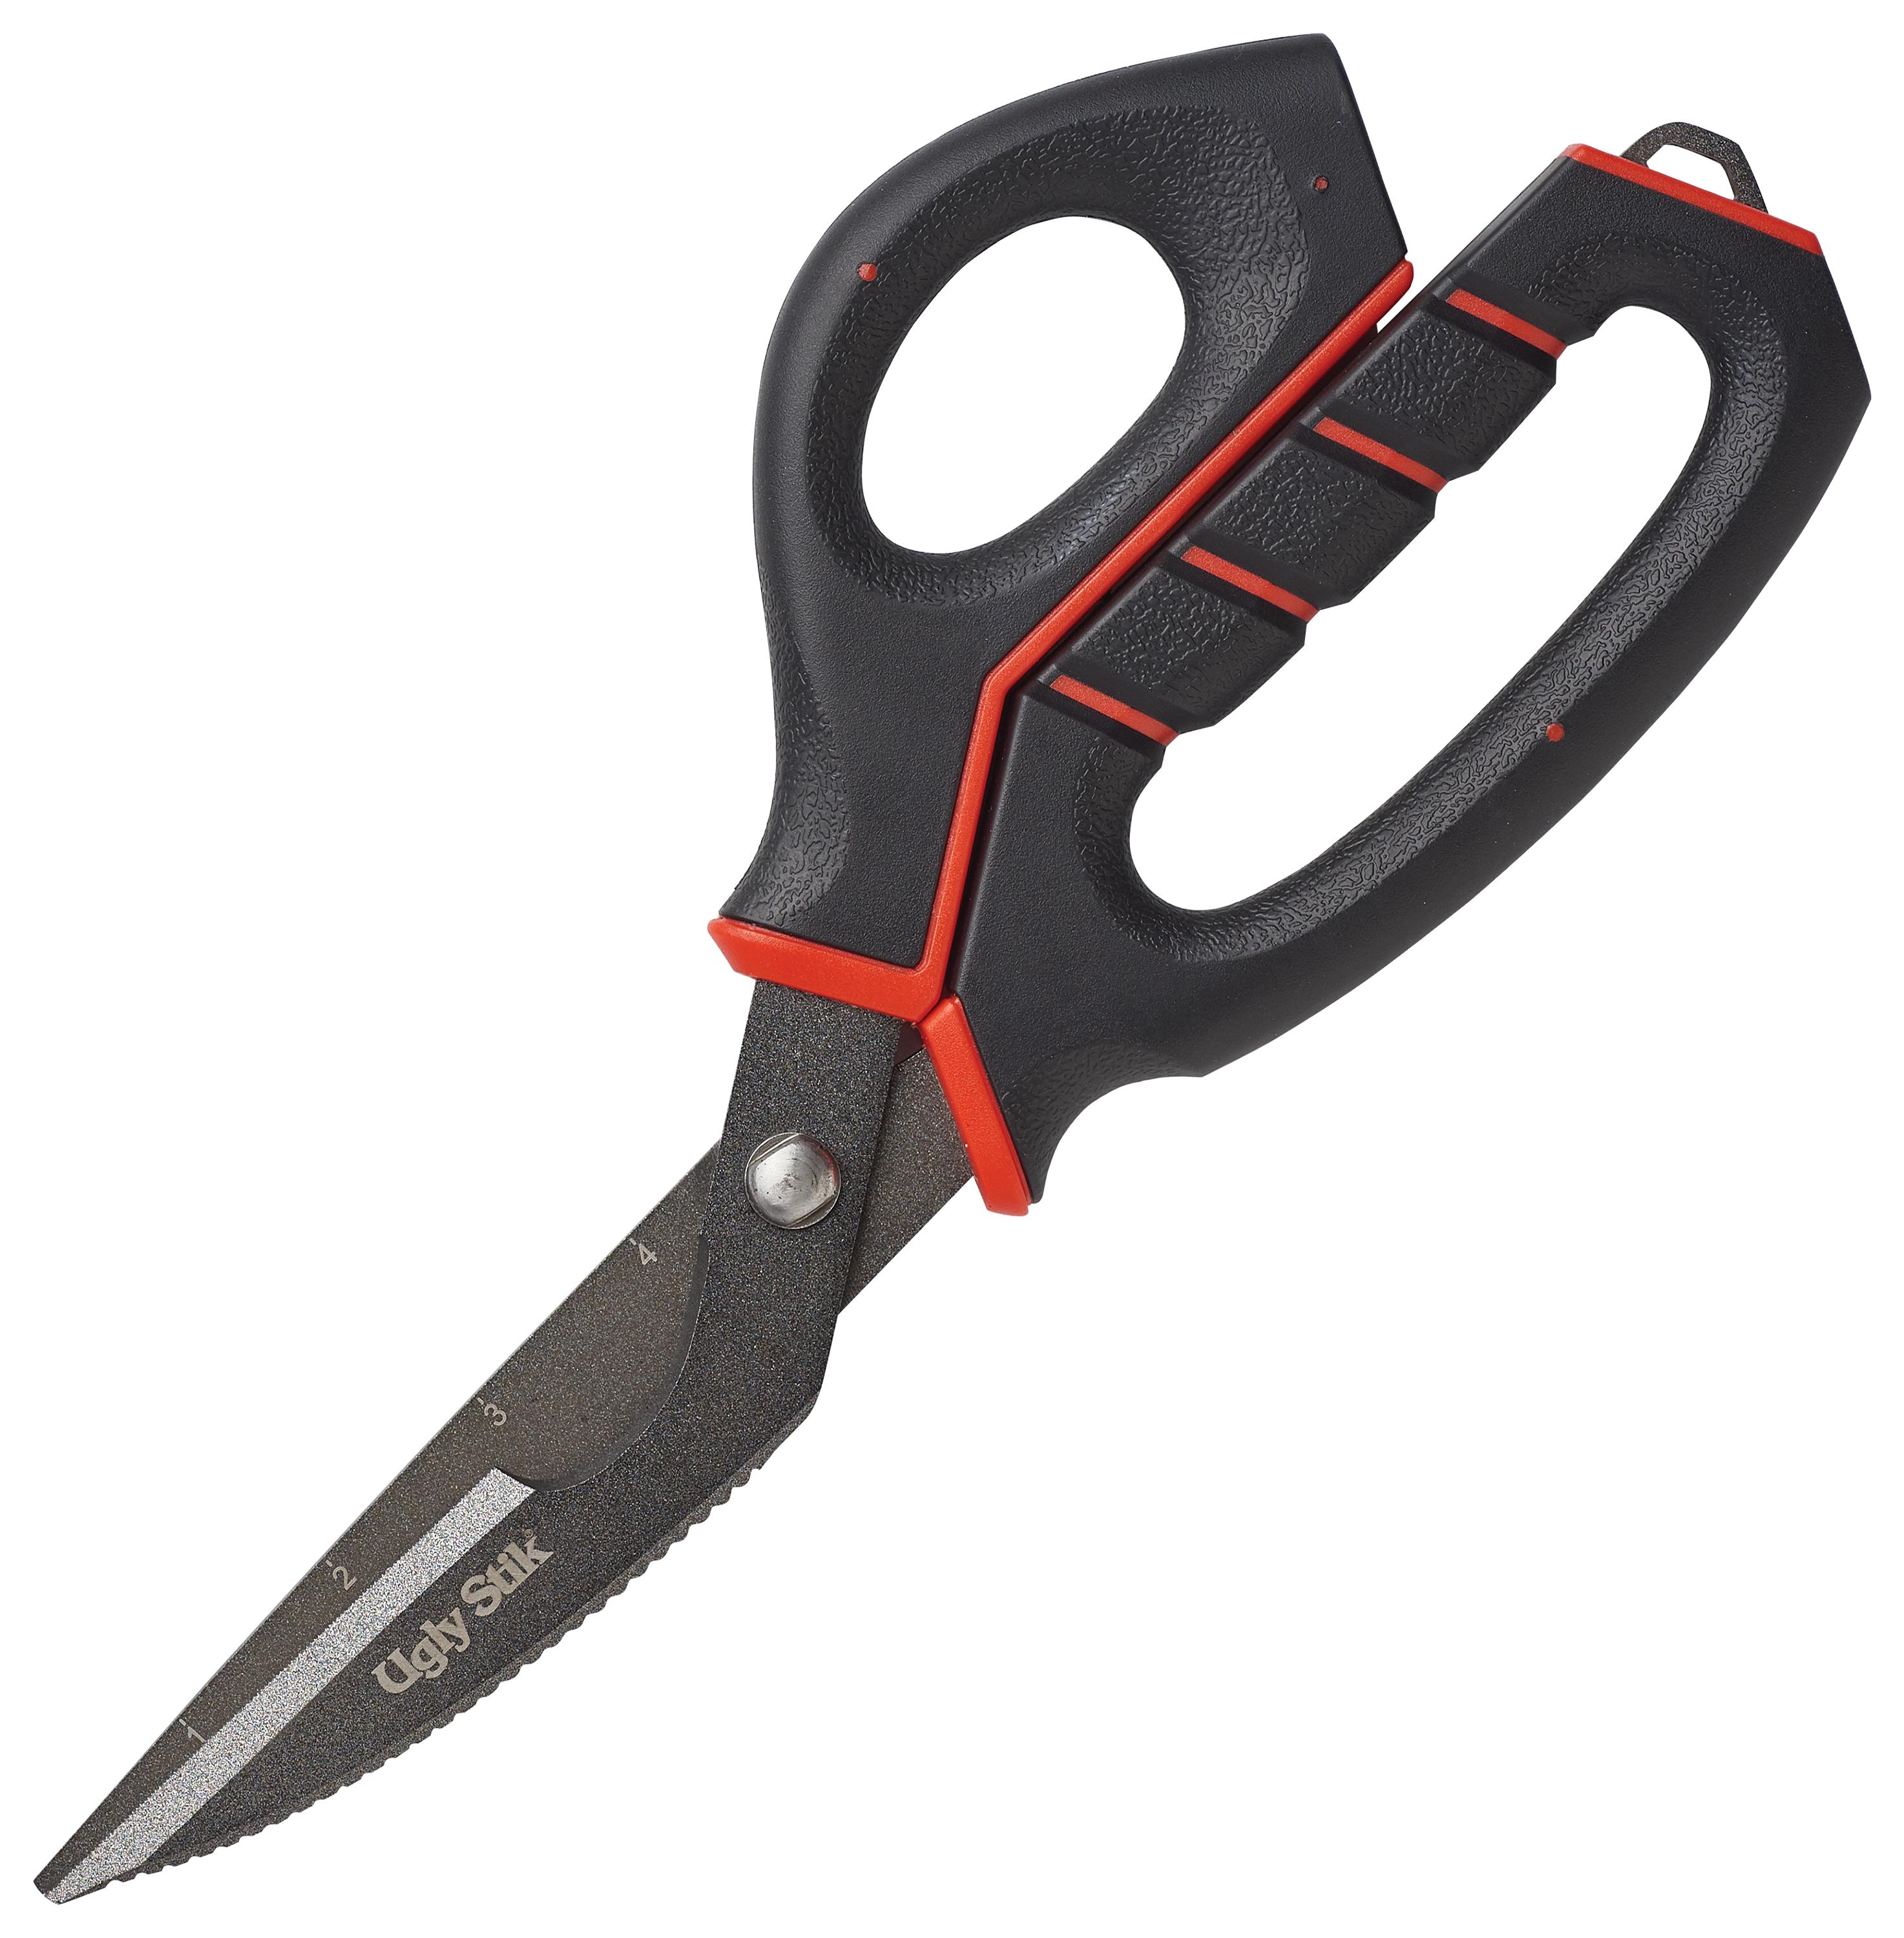 Pursuit Game Shears